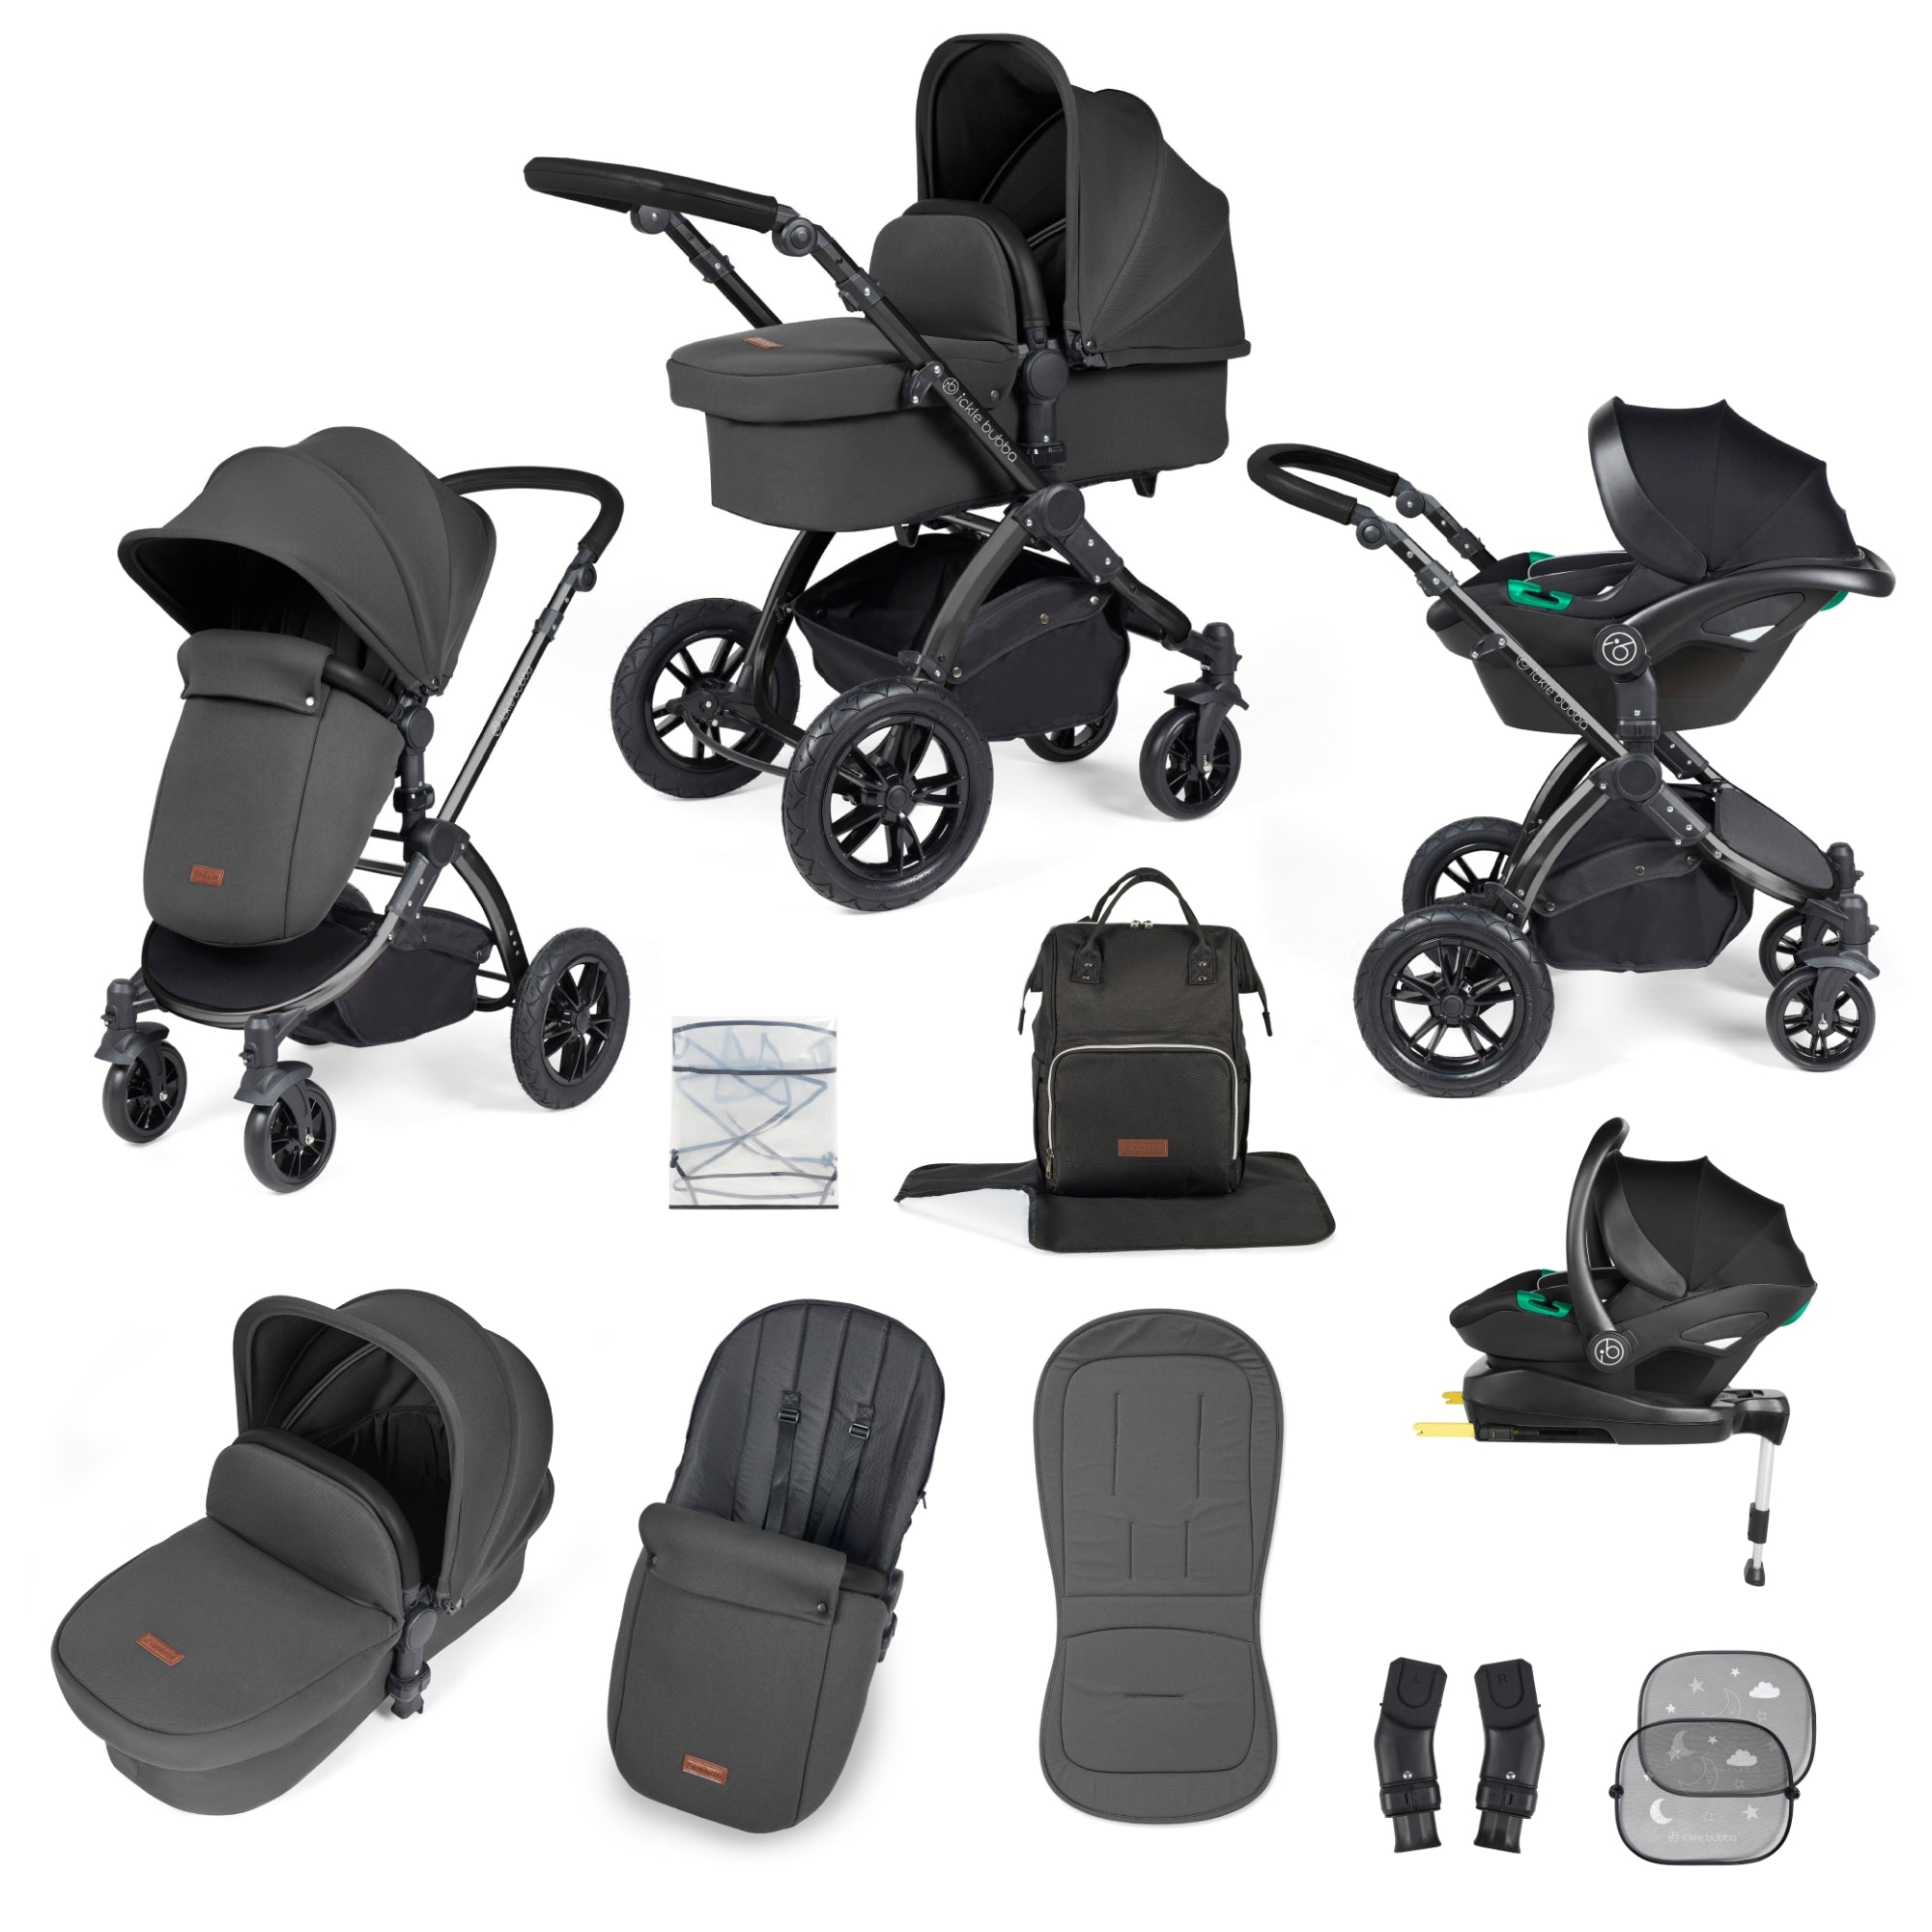 Stomp Luxe - All in one i-Size Travel System - Charcoal Grey with Black Chassis